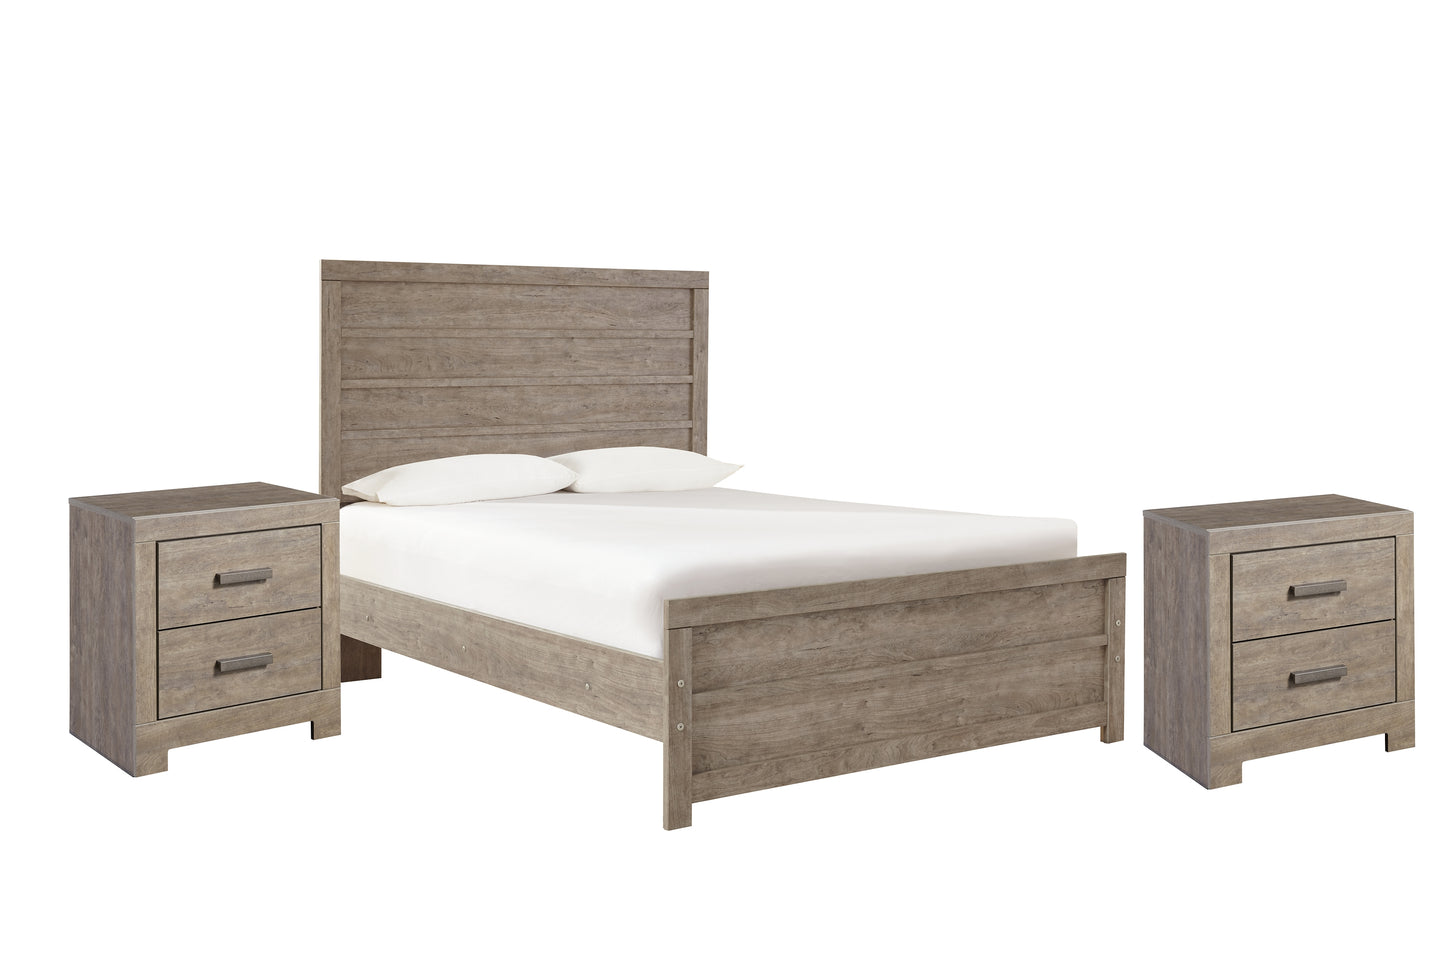 Ashley Express - Culverbach Full Panel Bed with 2 Nightstands